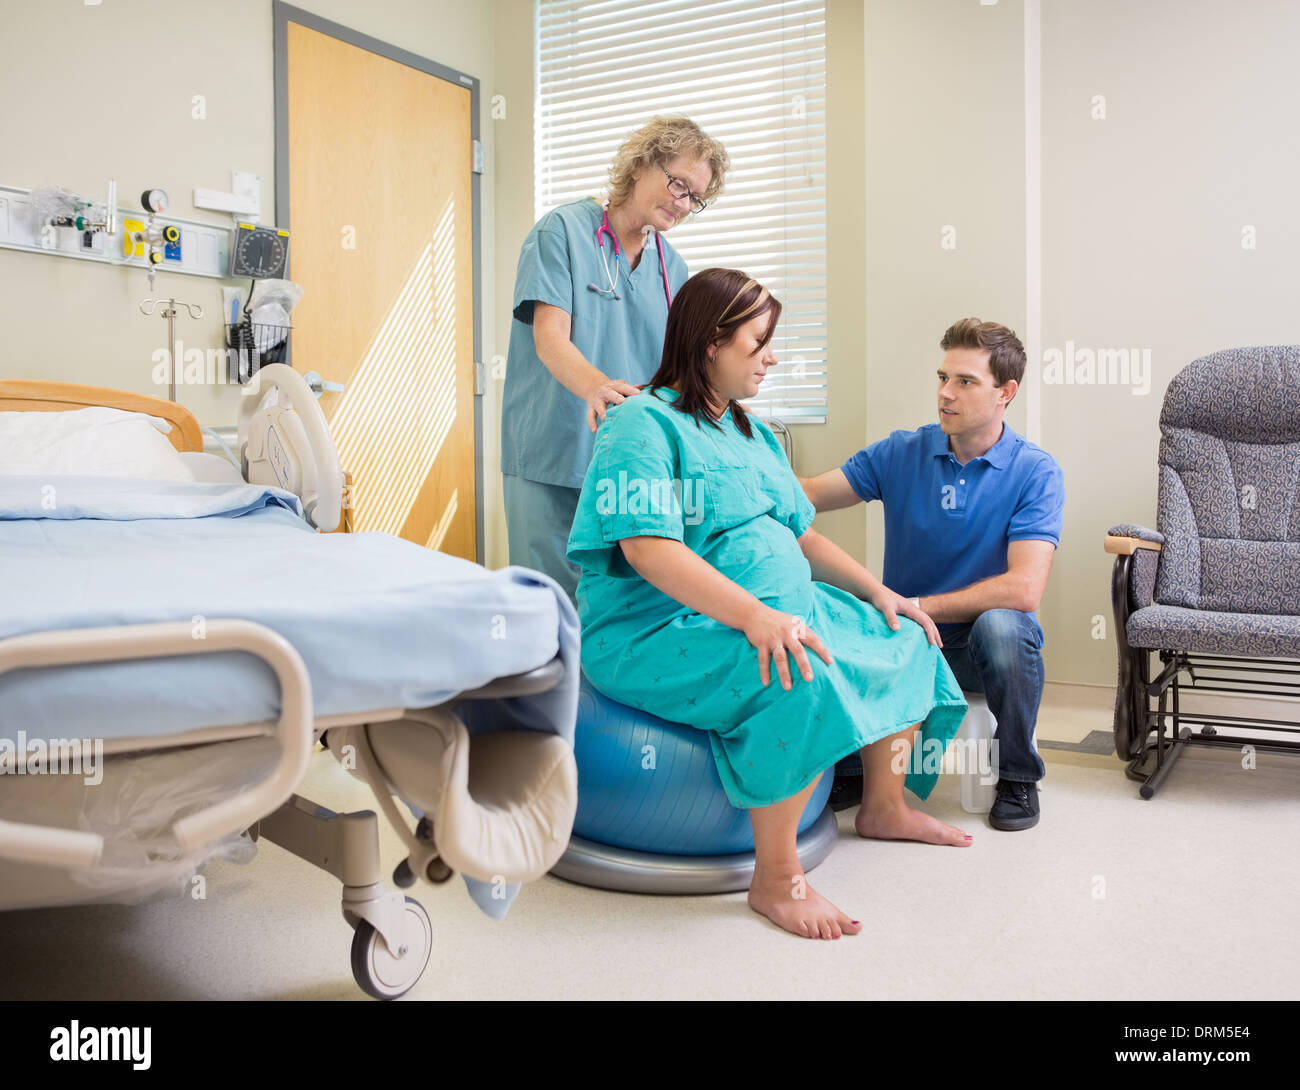 Nurse And Man Assisting Pregnant Woman On Exercise Ball Stock Photo